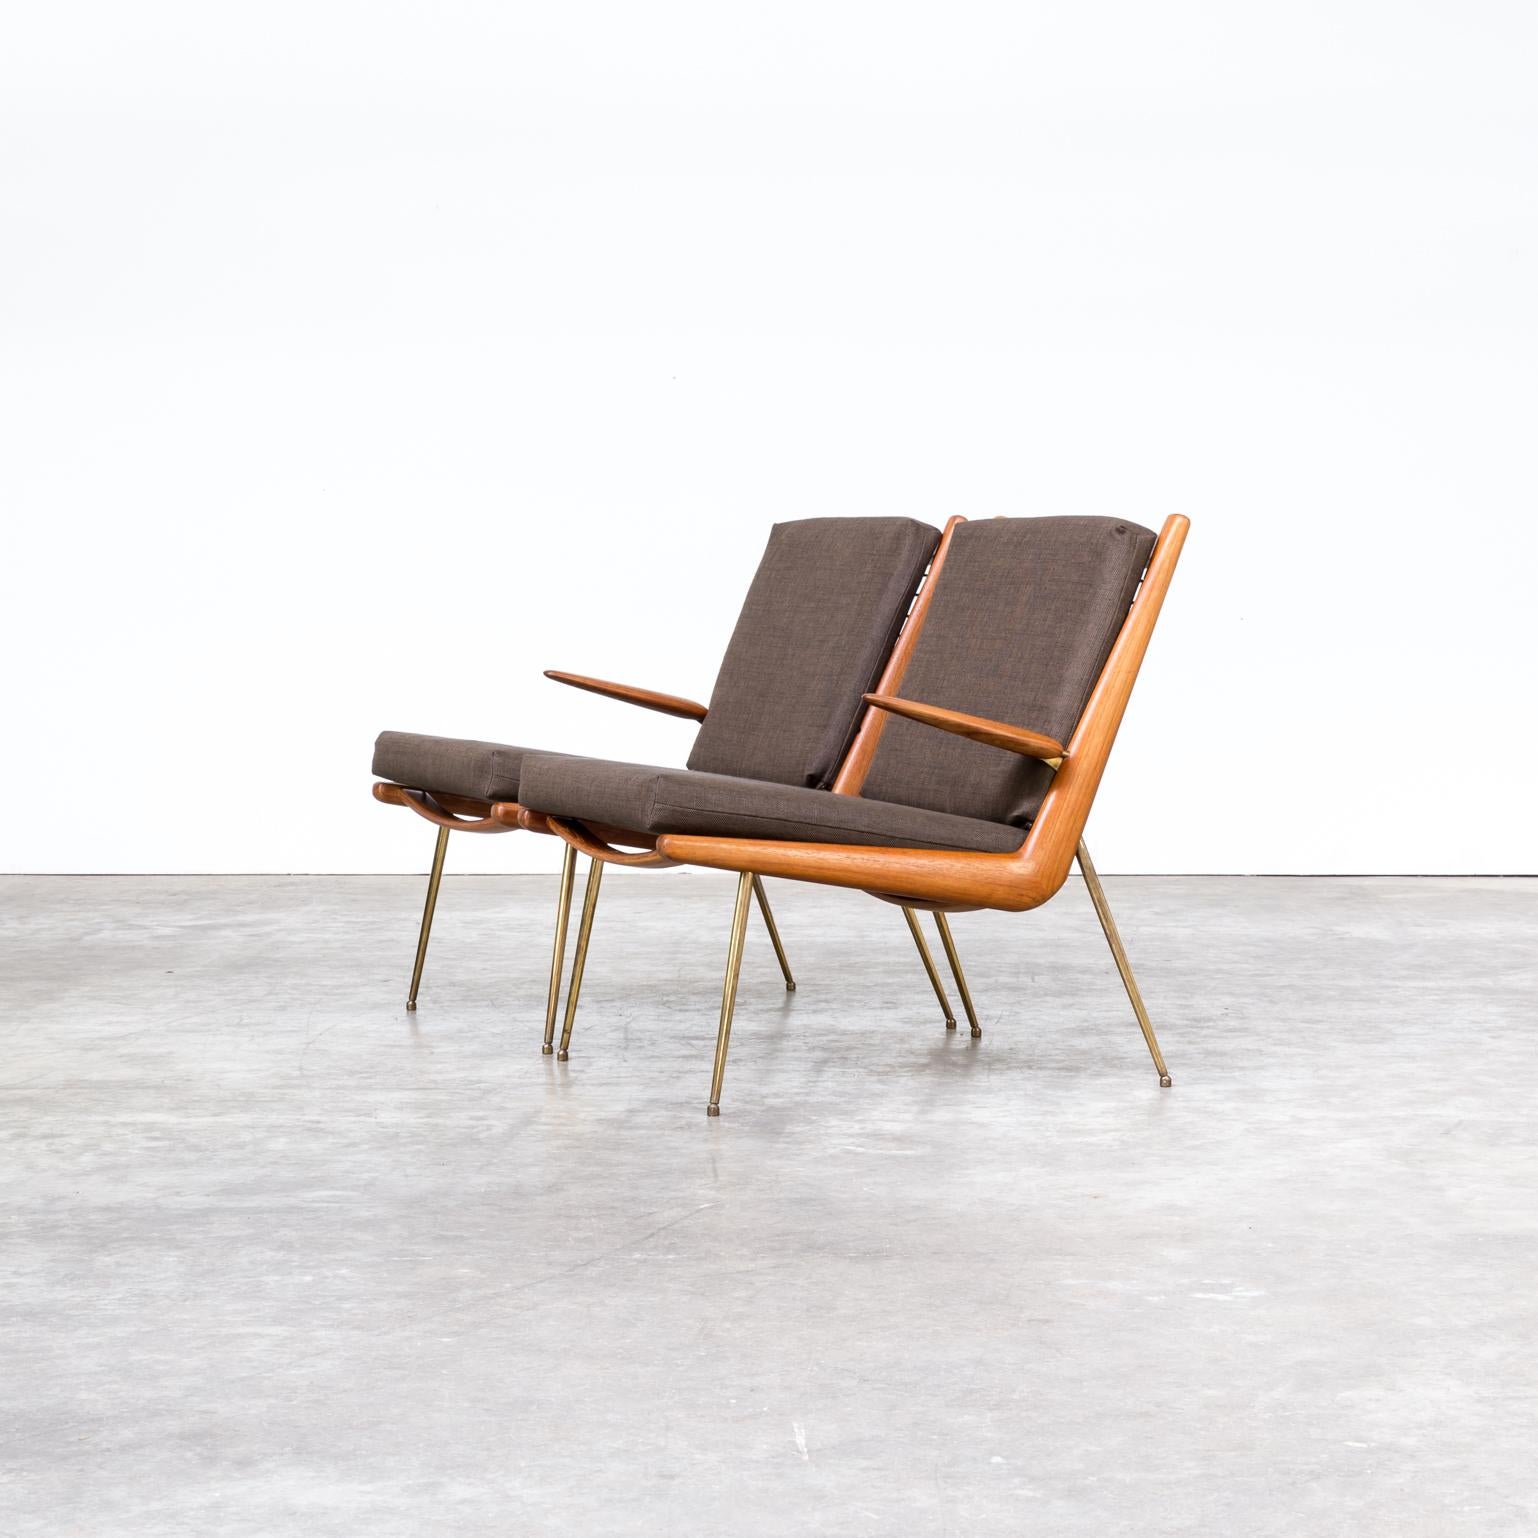 1960s Peter Hvidt and Orla Mølgaard-Nielsen ‘Boomerang’ chair FD 135 for France & Son, set of two. First edition, very good condition, reupholstered with new Lima fabric.